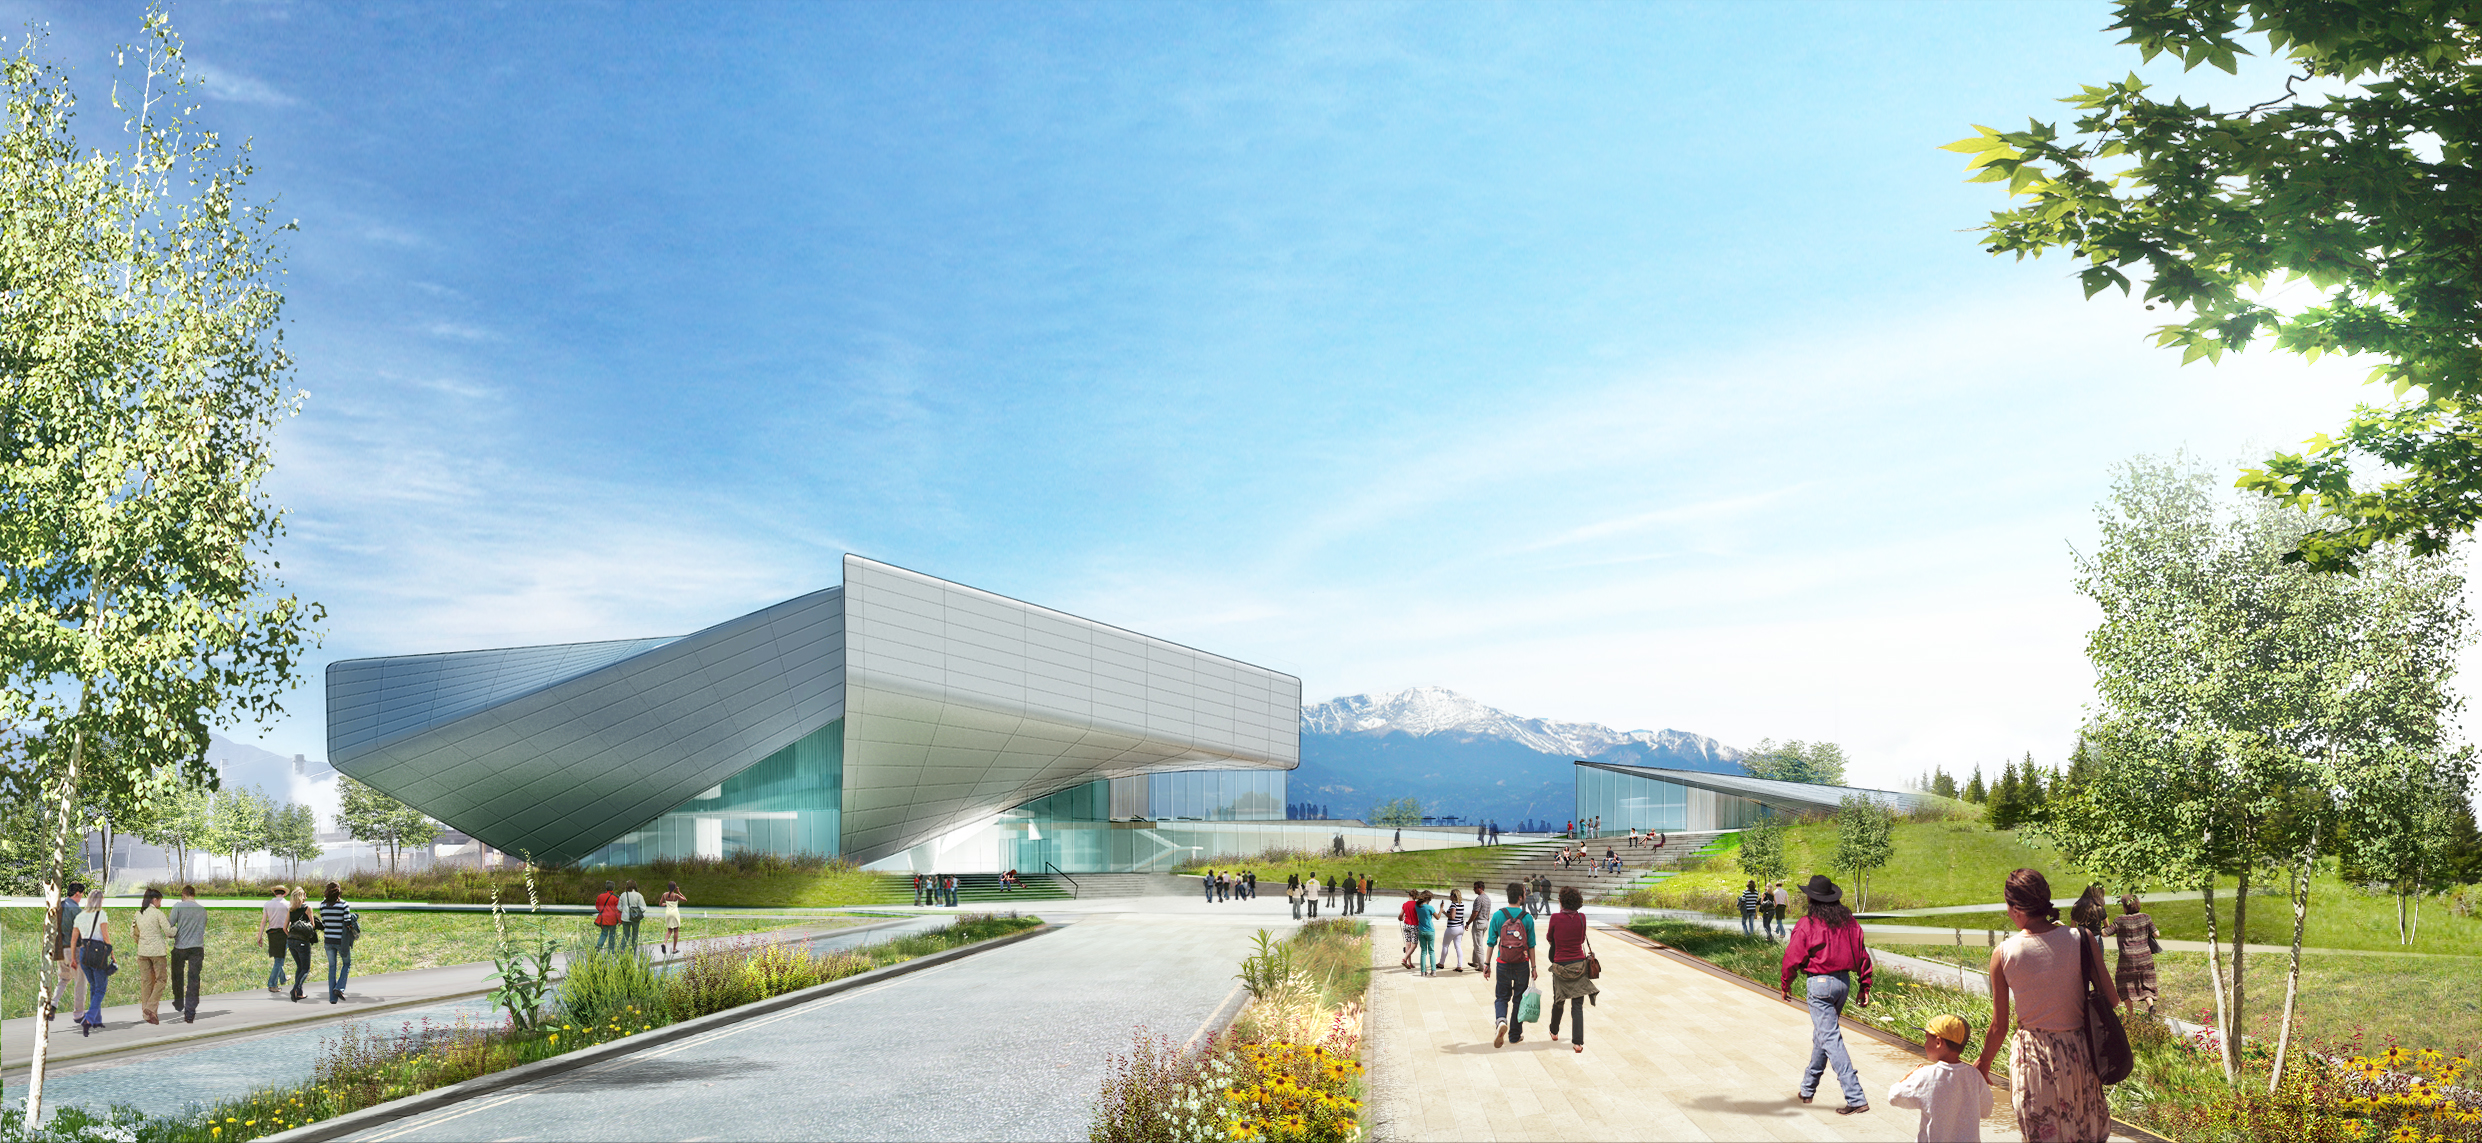 Preliminary Design for U.S. Olympic Museum Unveiled